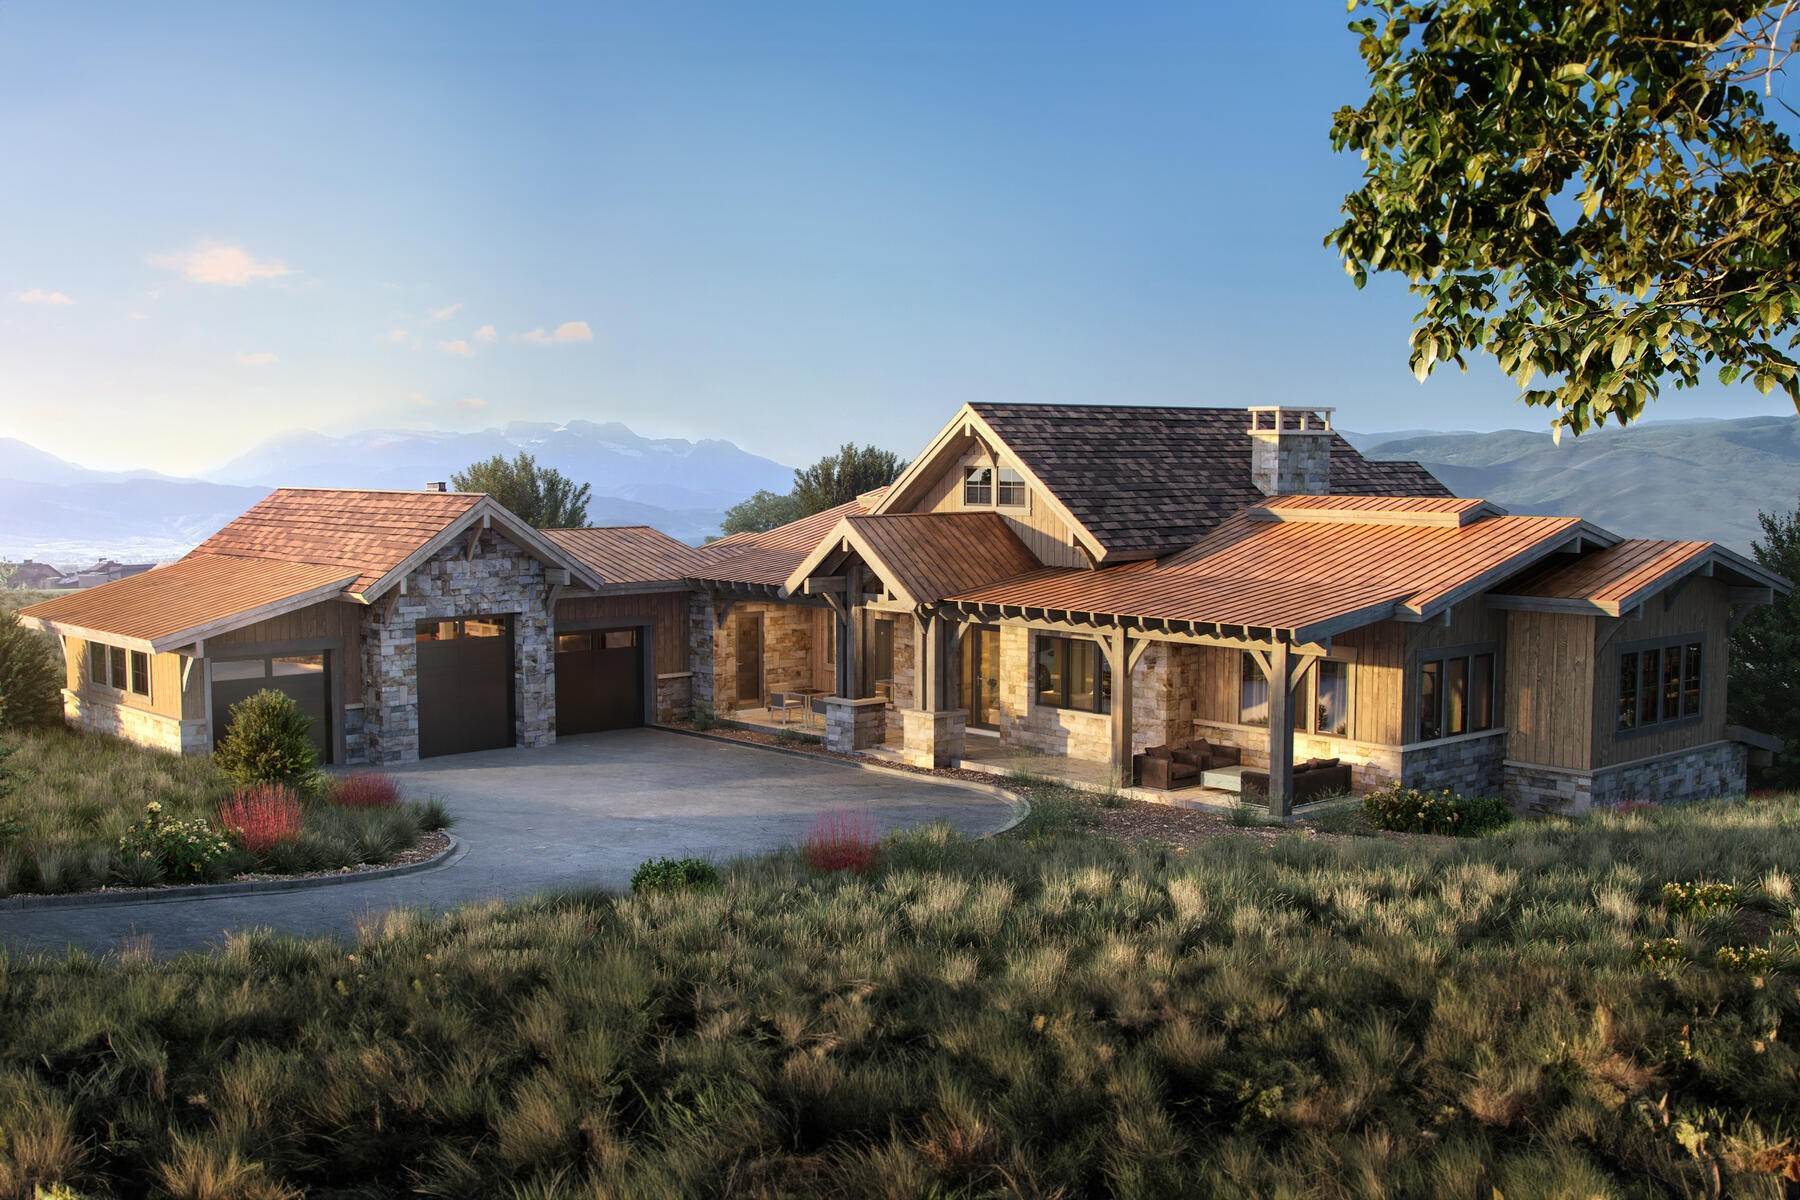 Single Family Homes for Sale at Exquisite New Construction Mountain Modern Home! 2044 E. Notch Mountain Circle Heber City, Utah 84032 United States